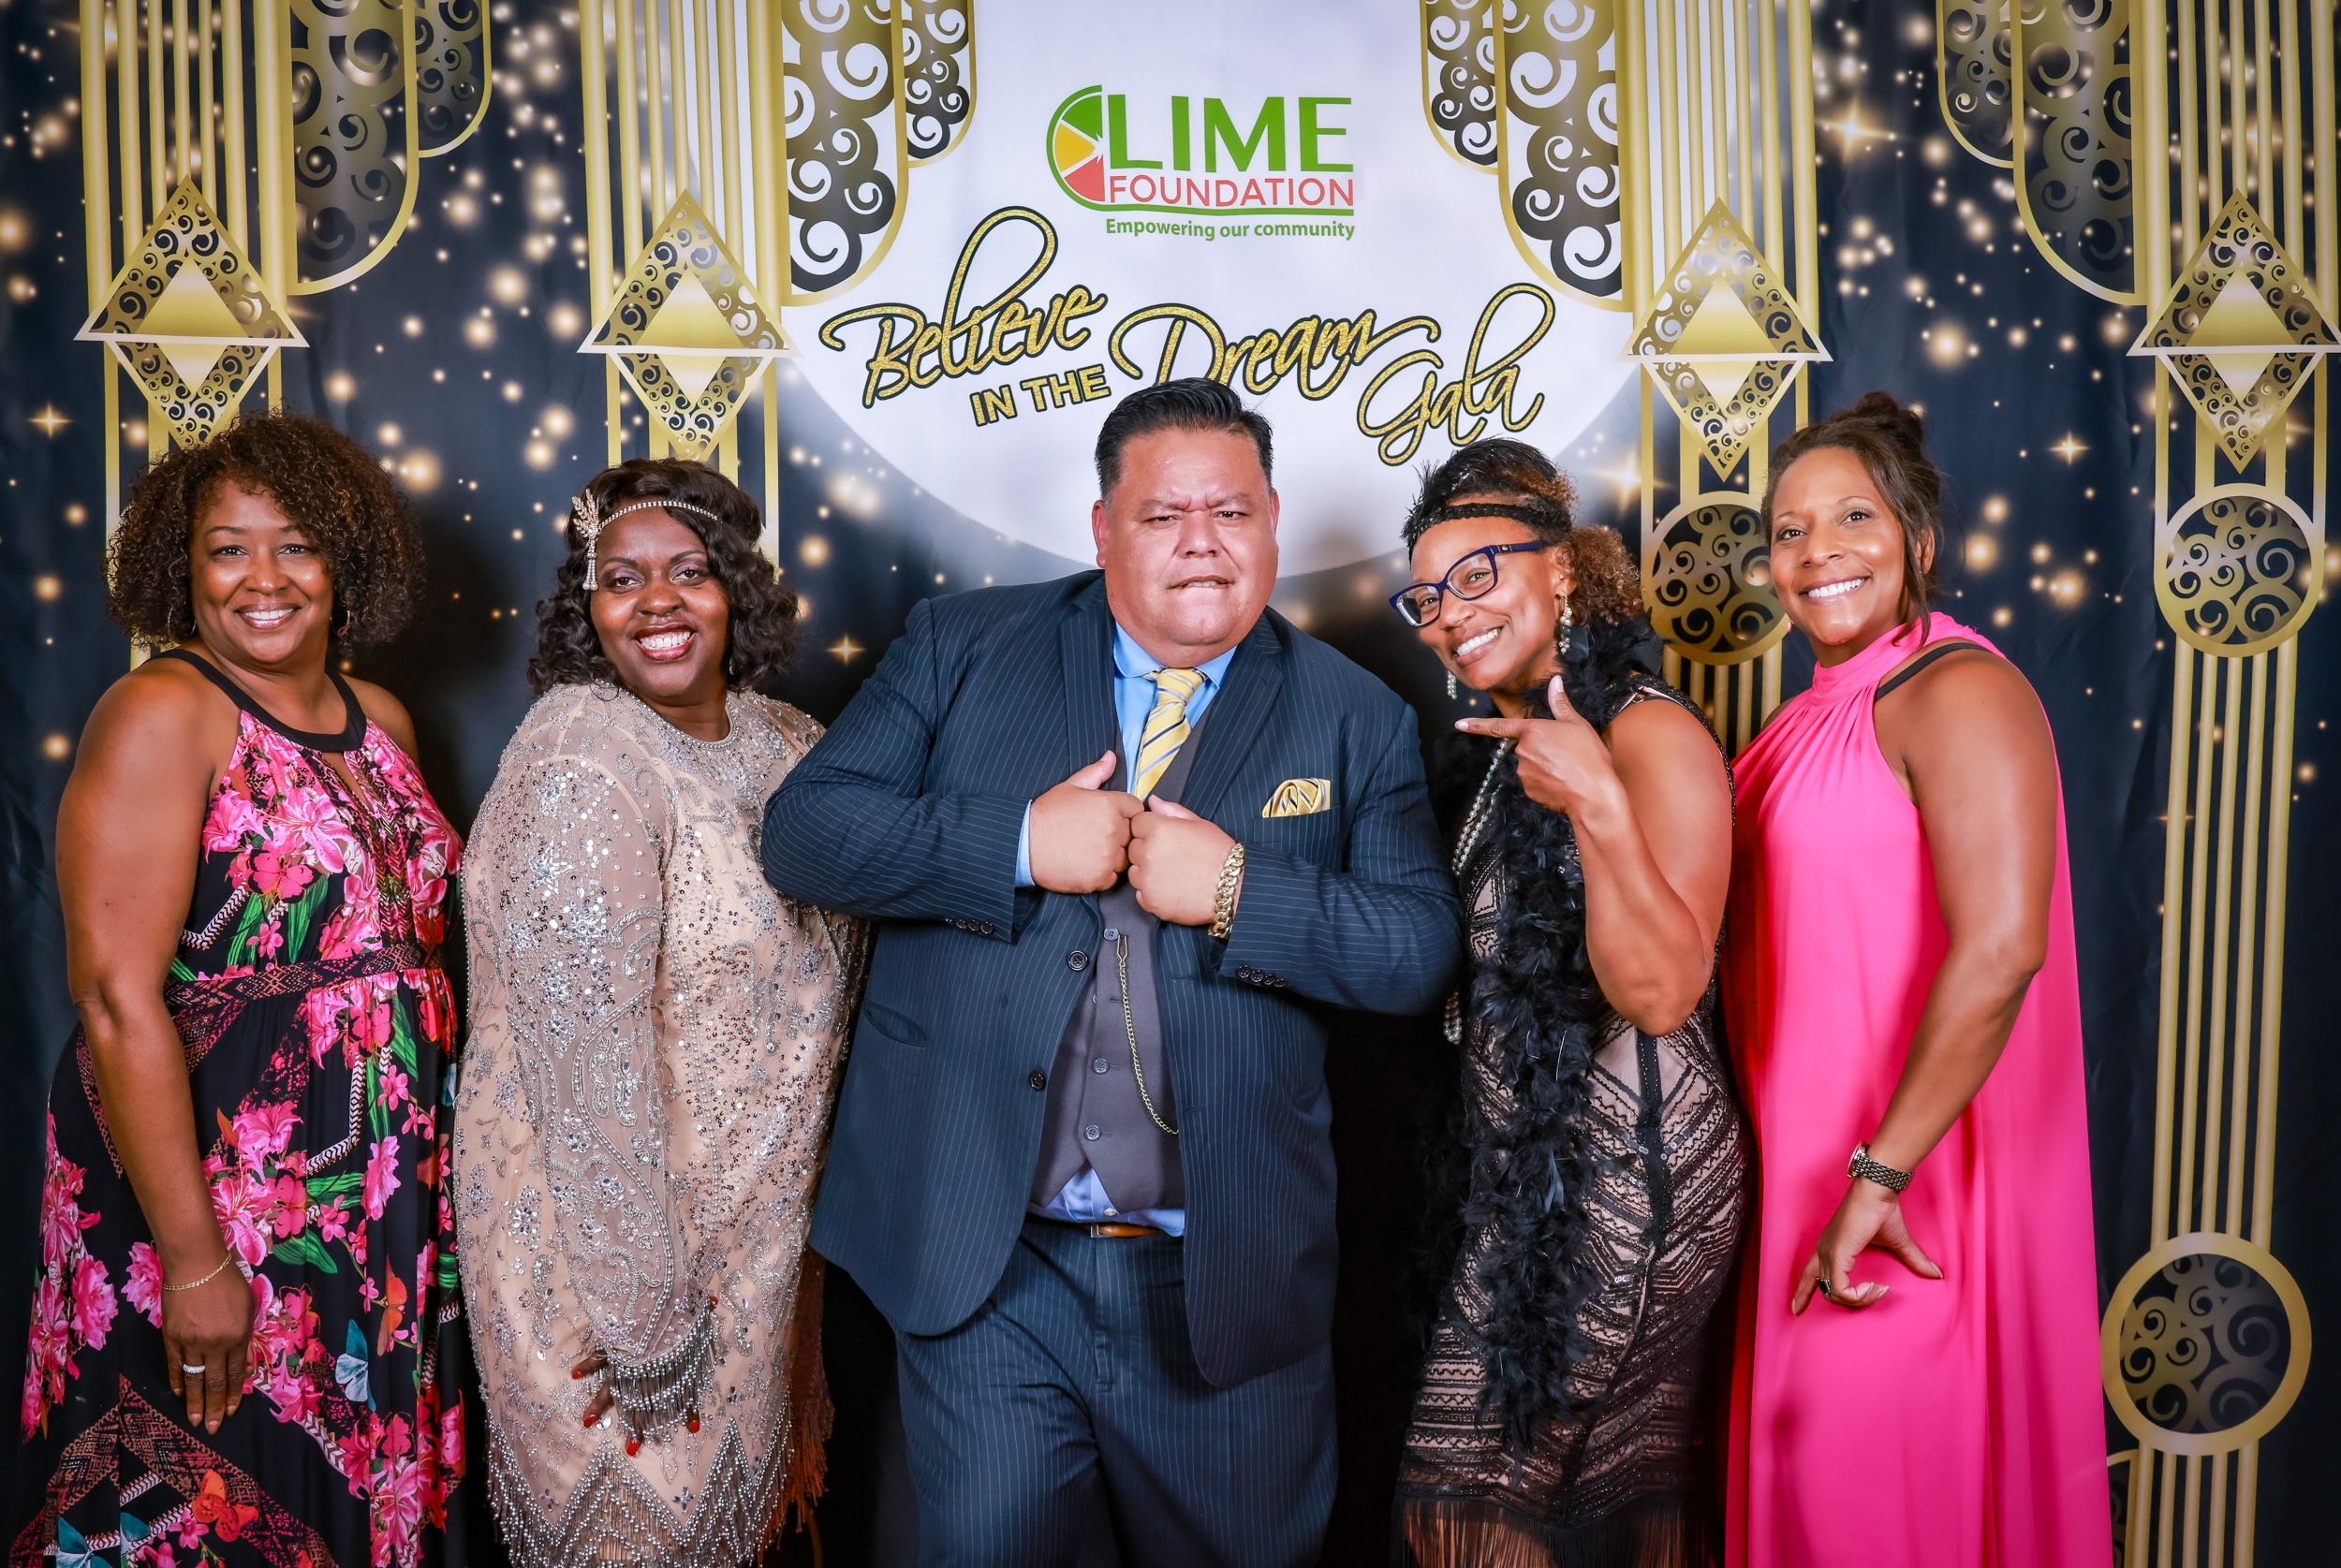 A group of people posing for a photo at a LIME Foundation event.